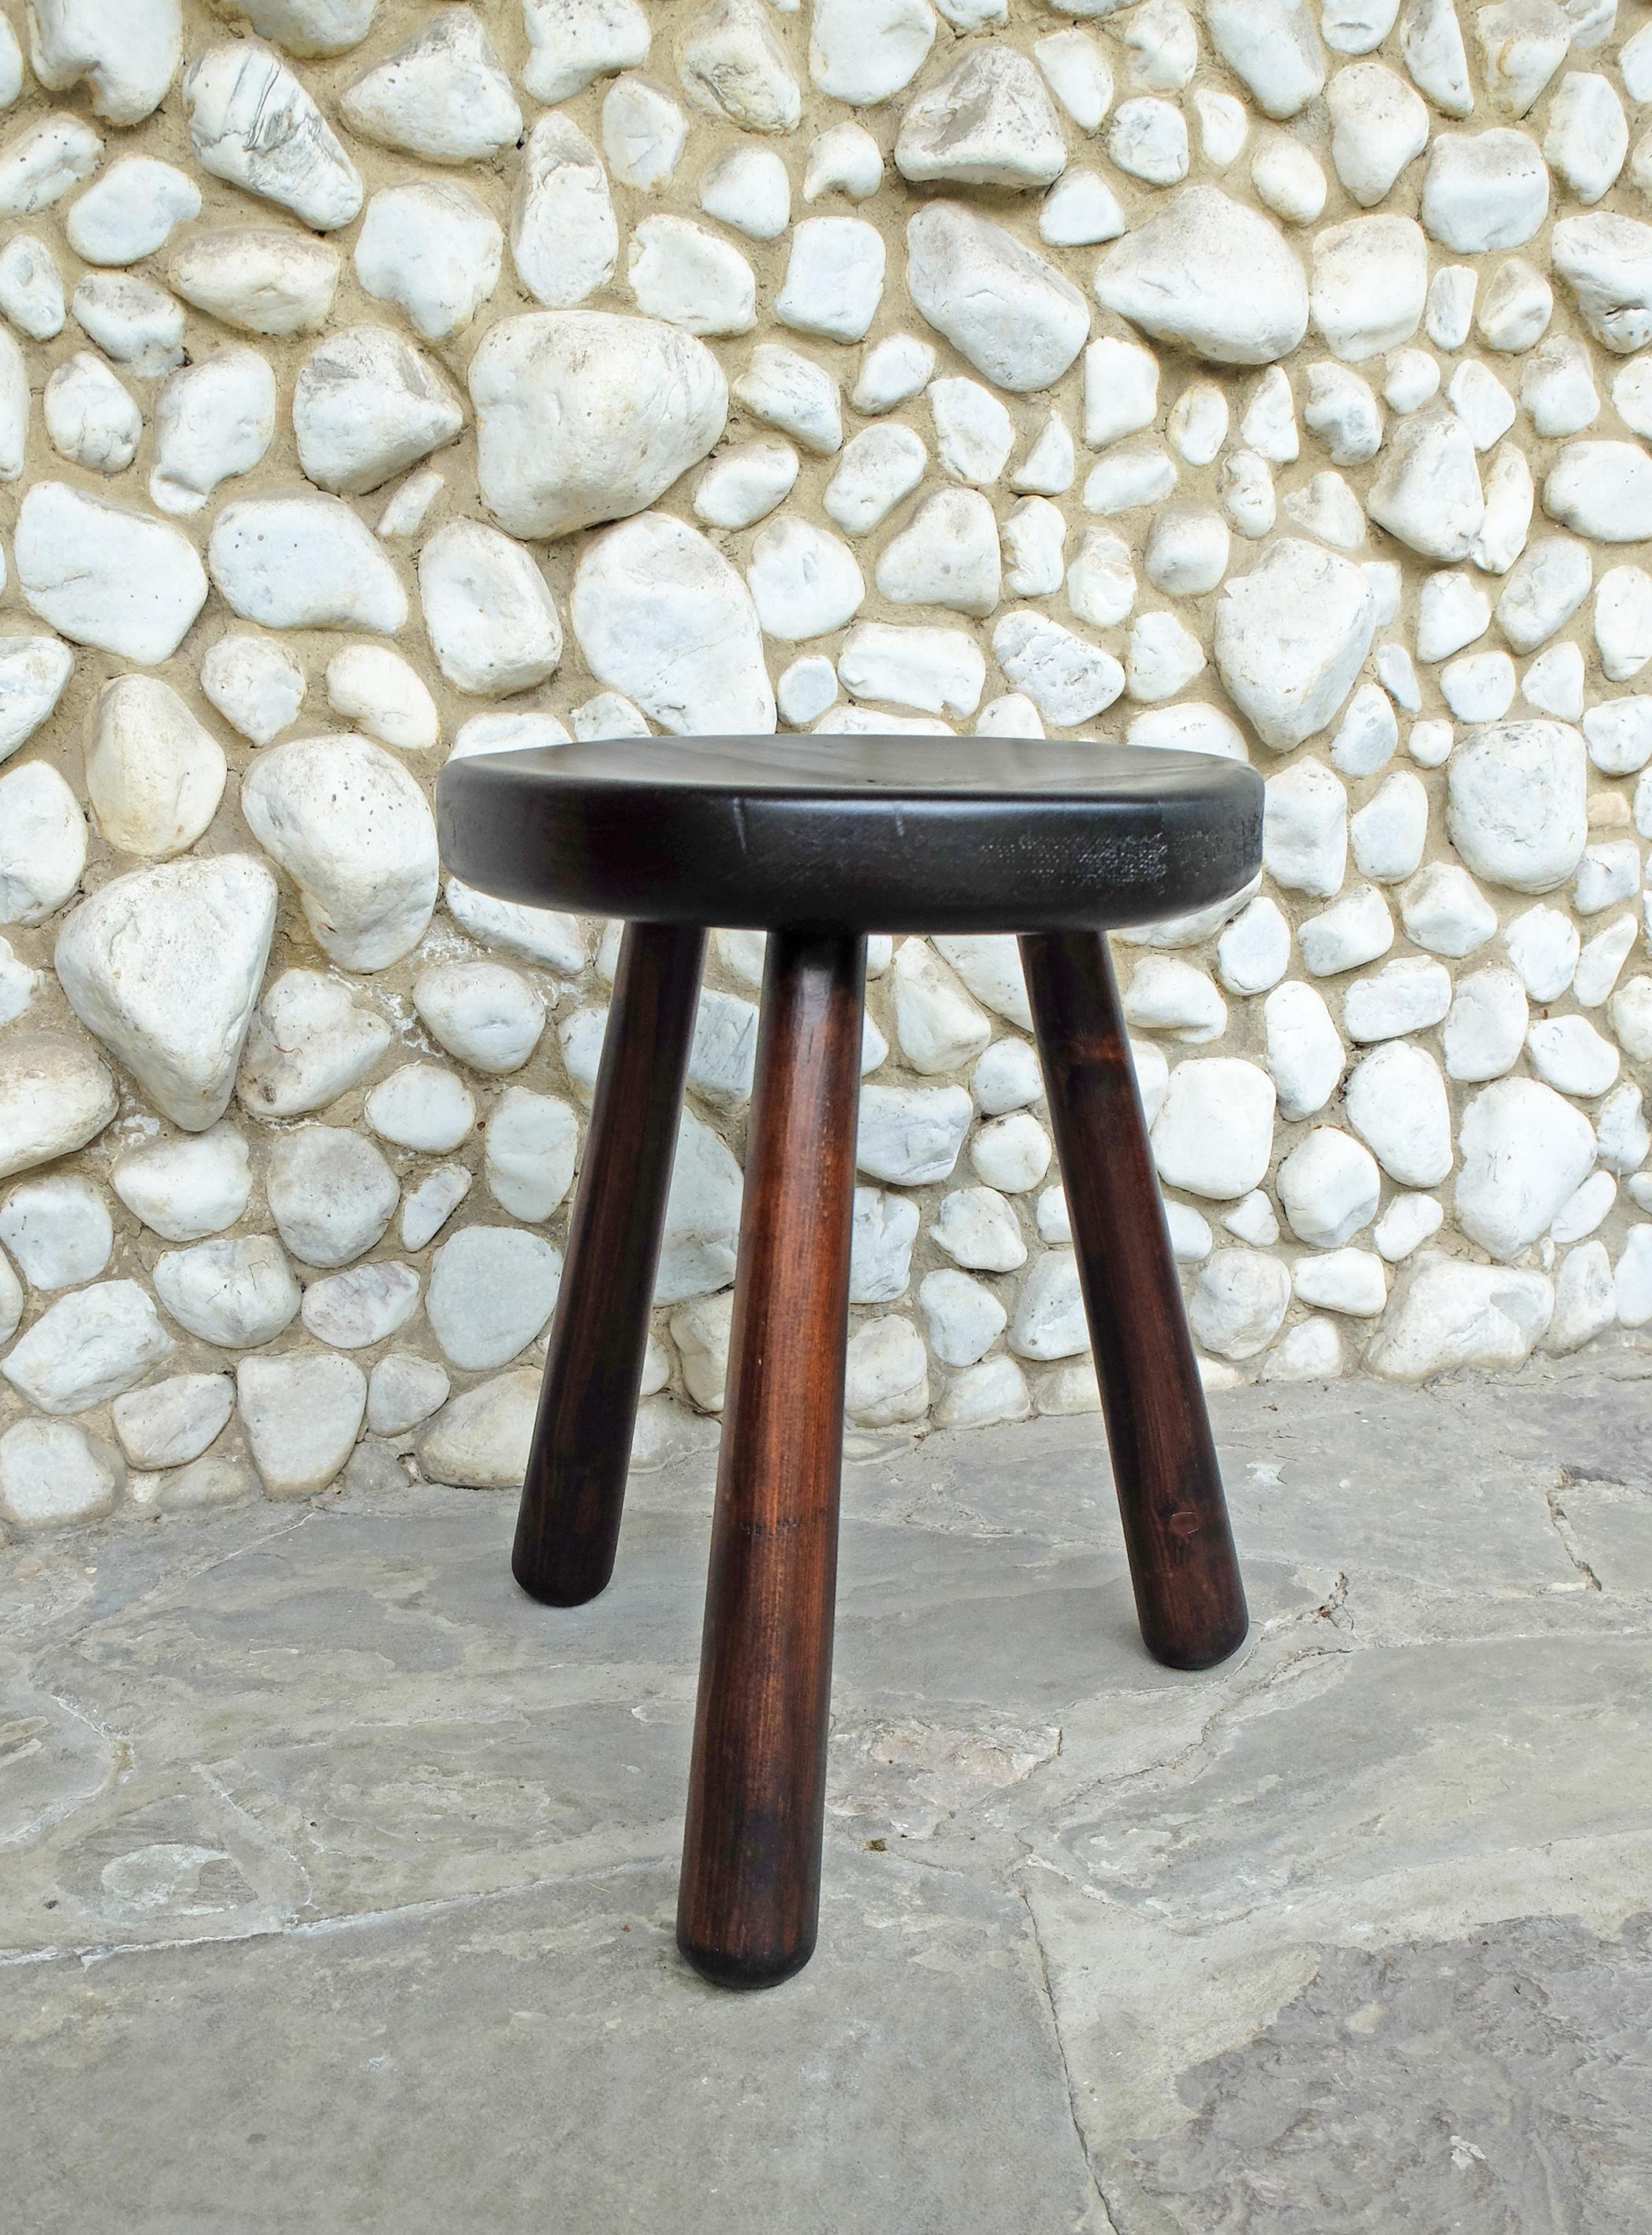 Tripod stool made of solid pinewood. Vintage, made in France in the 1960s or 1970s.

In the style of the stools Charlotte Perriand designed for the French Ski resorts of Les Arcs and Meribel. 
The traditional assembly techniques and the concave